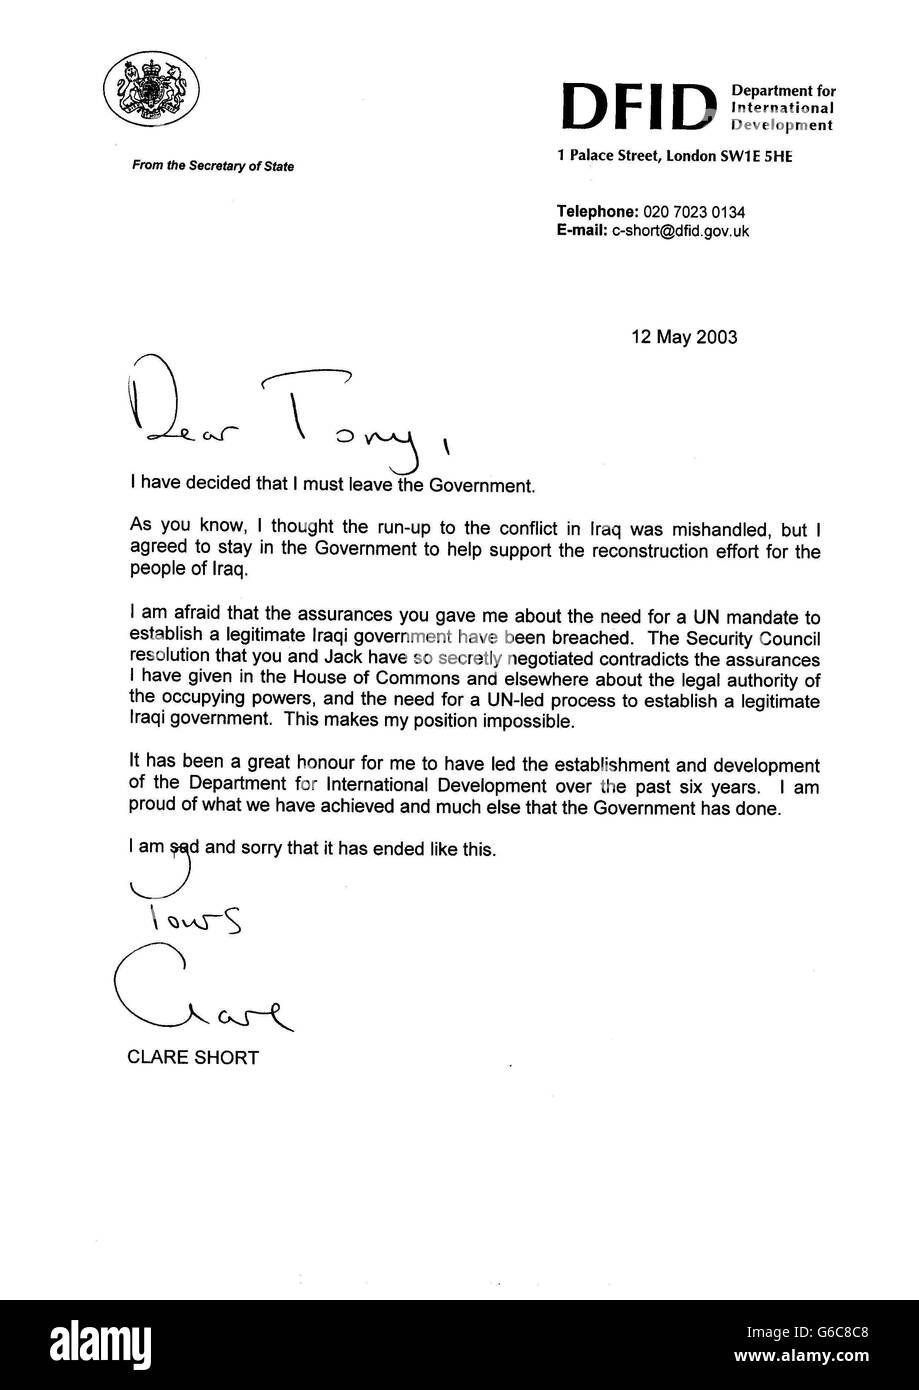 The resignation letter of Clare Short, who stepped down from her cabinet post as international development secretary. In her letter, she accused Mr Blair of breaching assurances he had given her on the role of the United Nations in governing post-conflict Iraq. * And she accused the Premier and Foreign Secretary Jack Straw of 'secretly' negotiating a UN Security Council resolution which contradicted assurances she had given in the Commons to MPs. Stock Photo